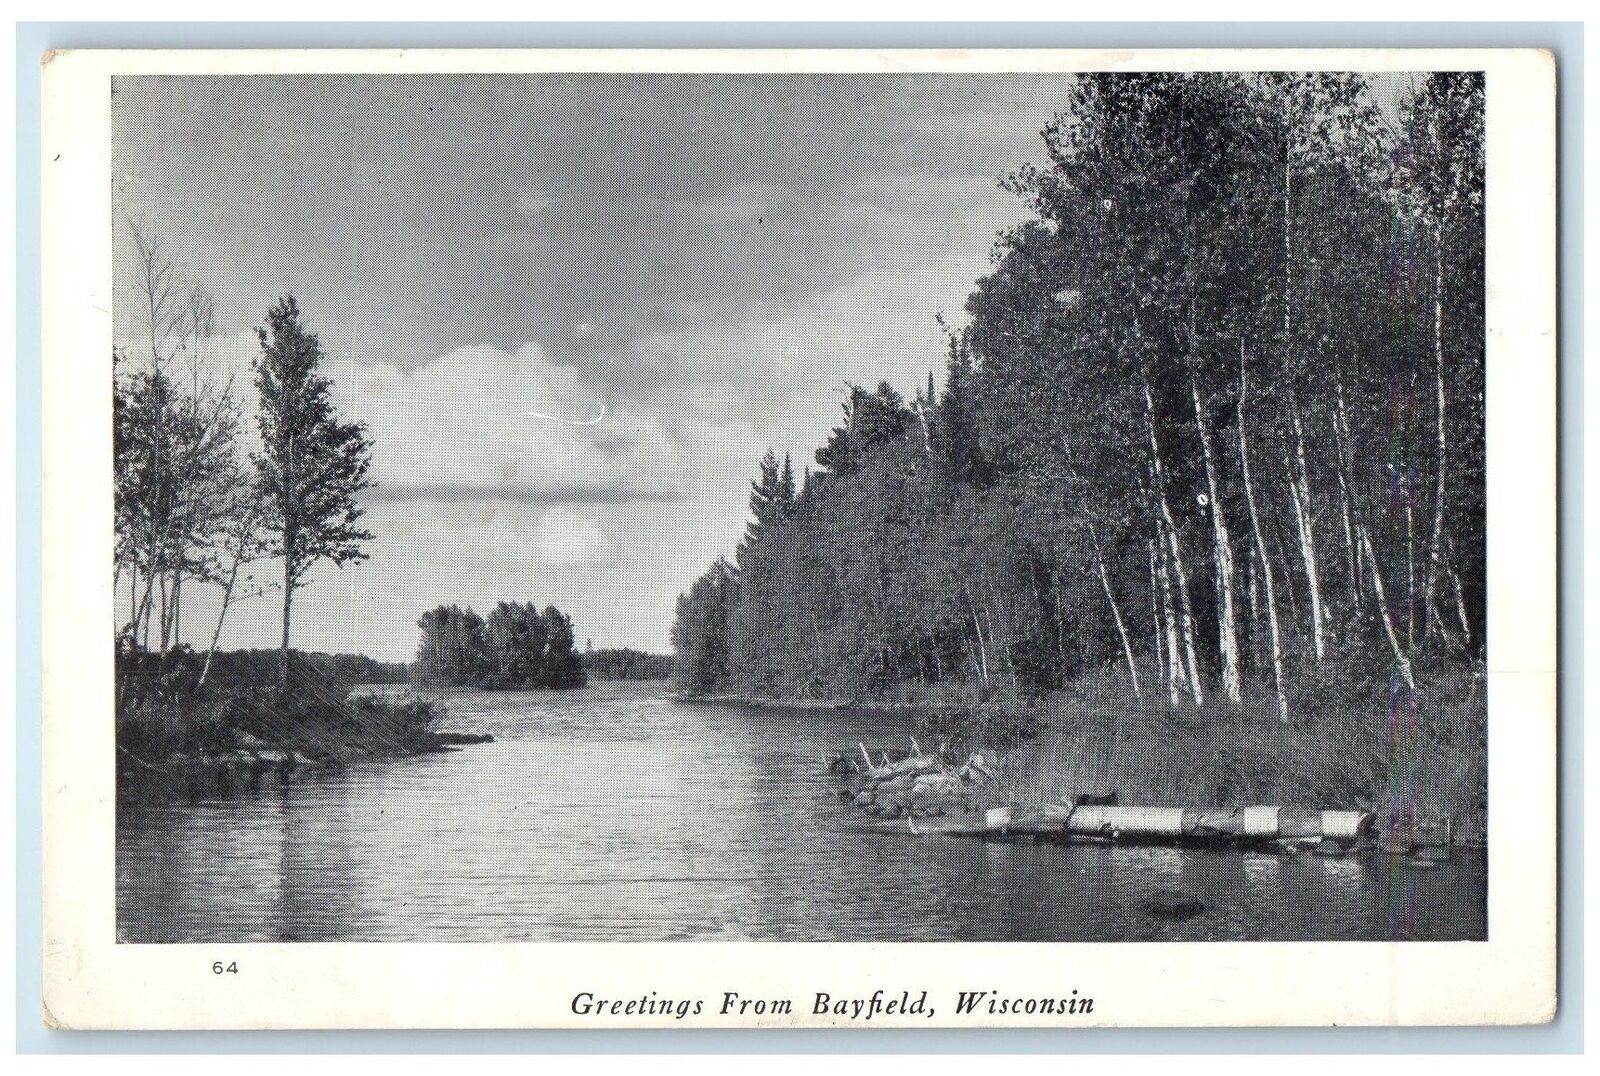 1948 Greetings From Bayfield Wisconsin WI Posted Trees And River Clouds Postcard